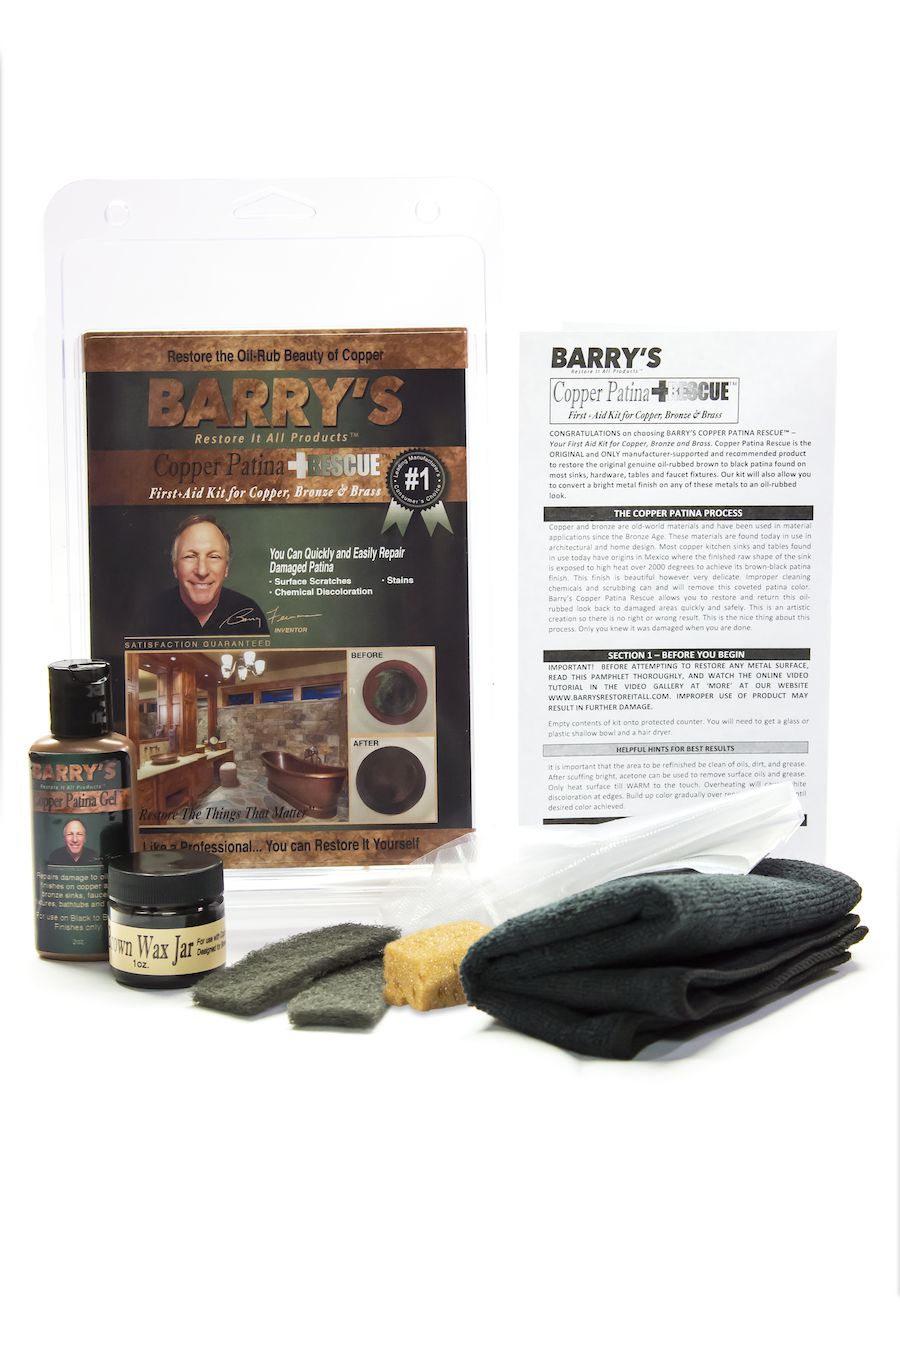 Barry's Restore It All Products Copper Patina Rescue Homeowner Kit